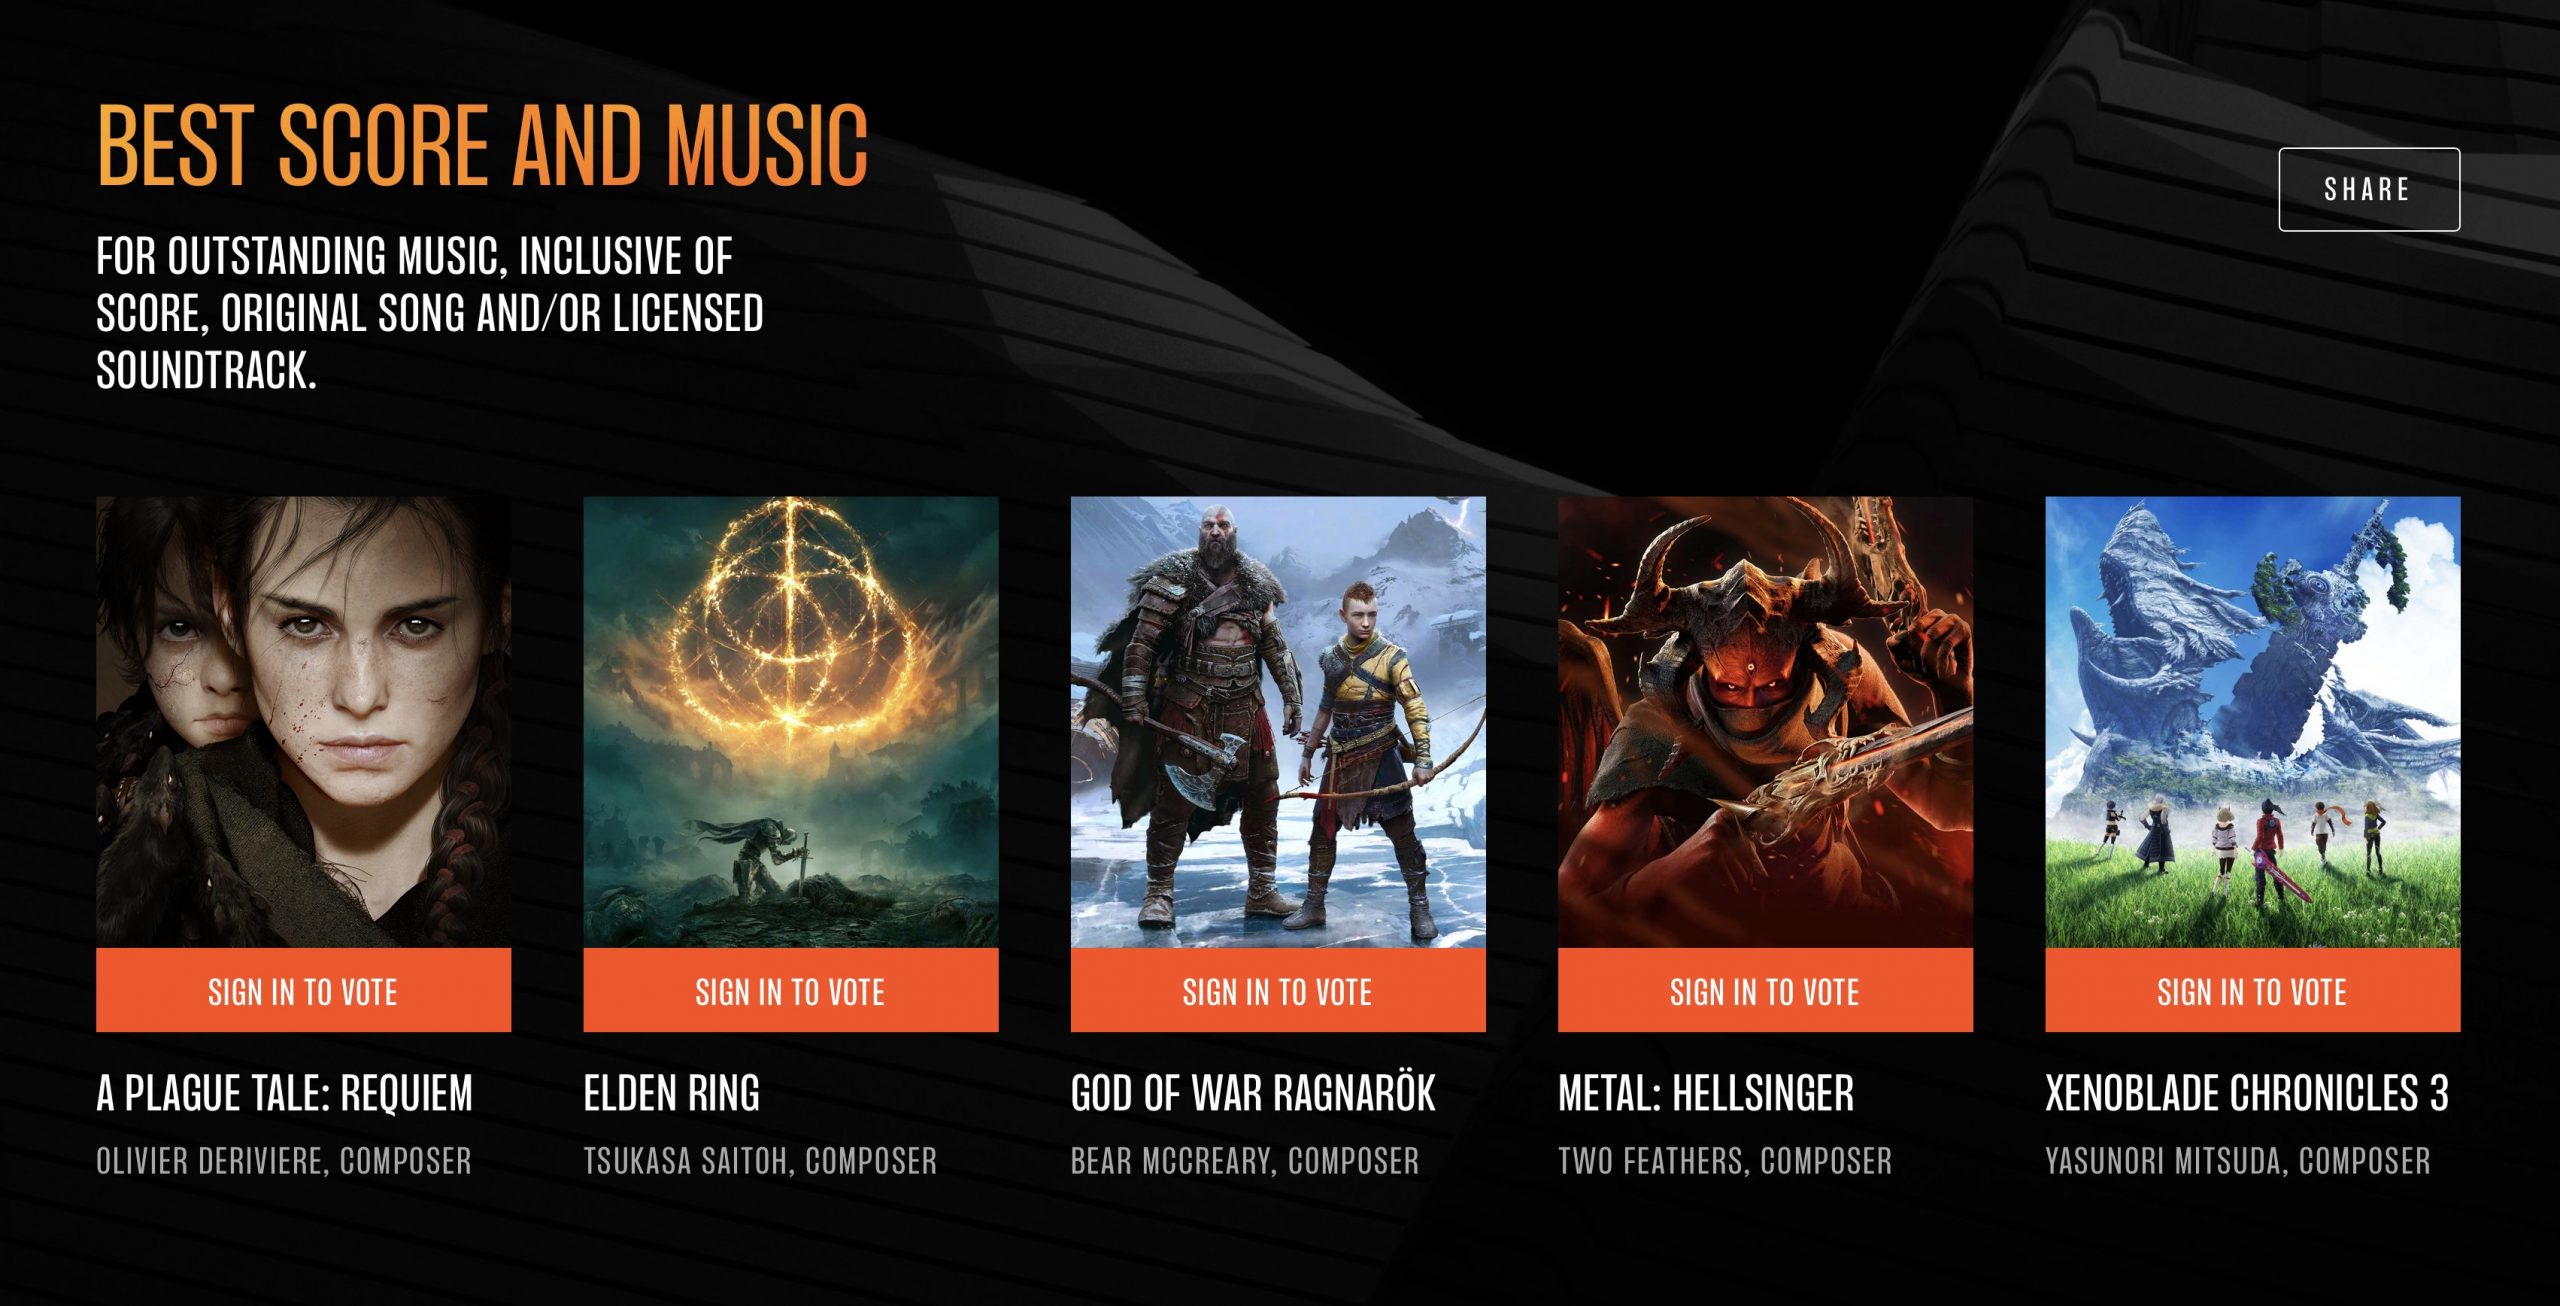 Best-Score-Music-THE-GAME-AWARDS-2022